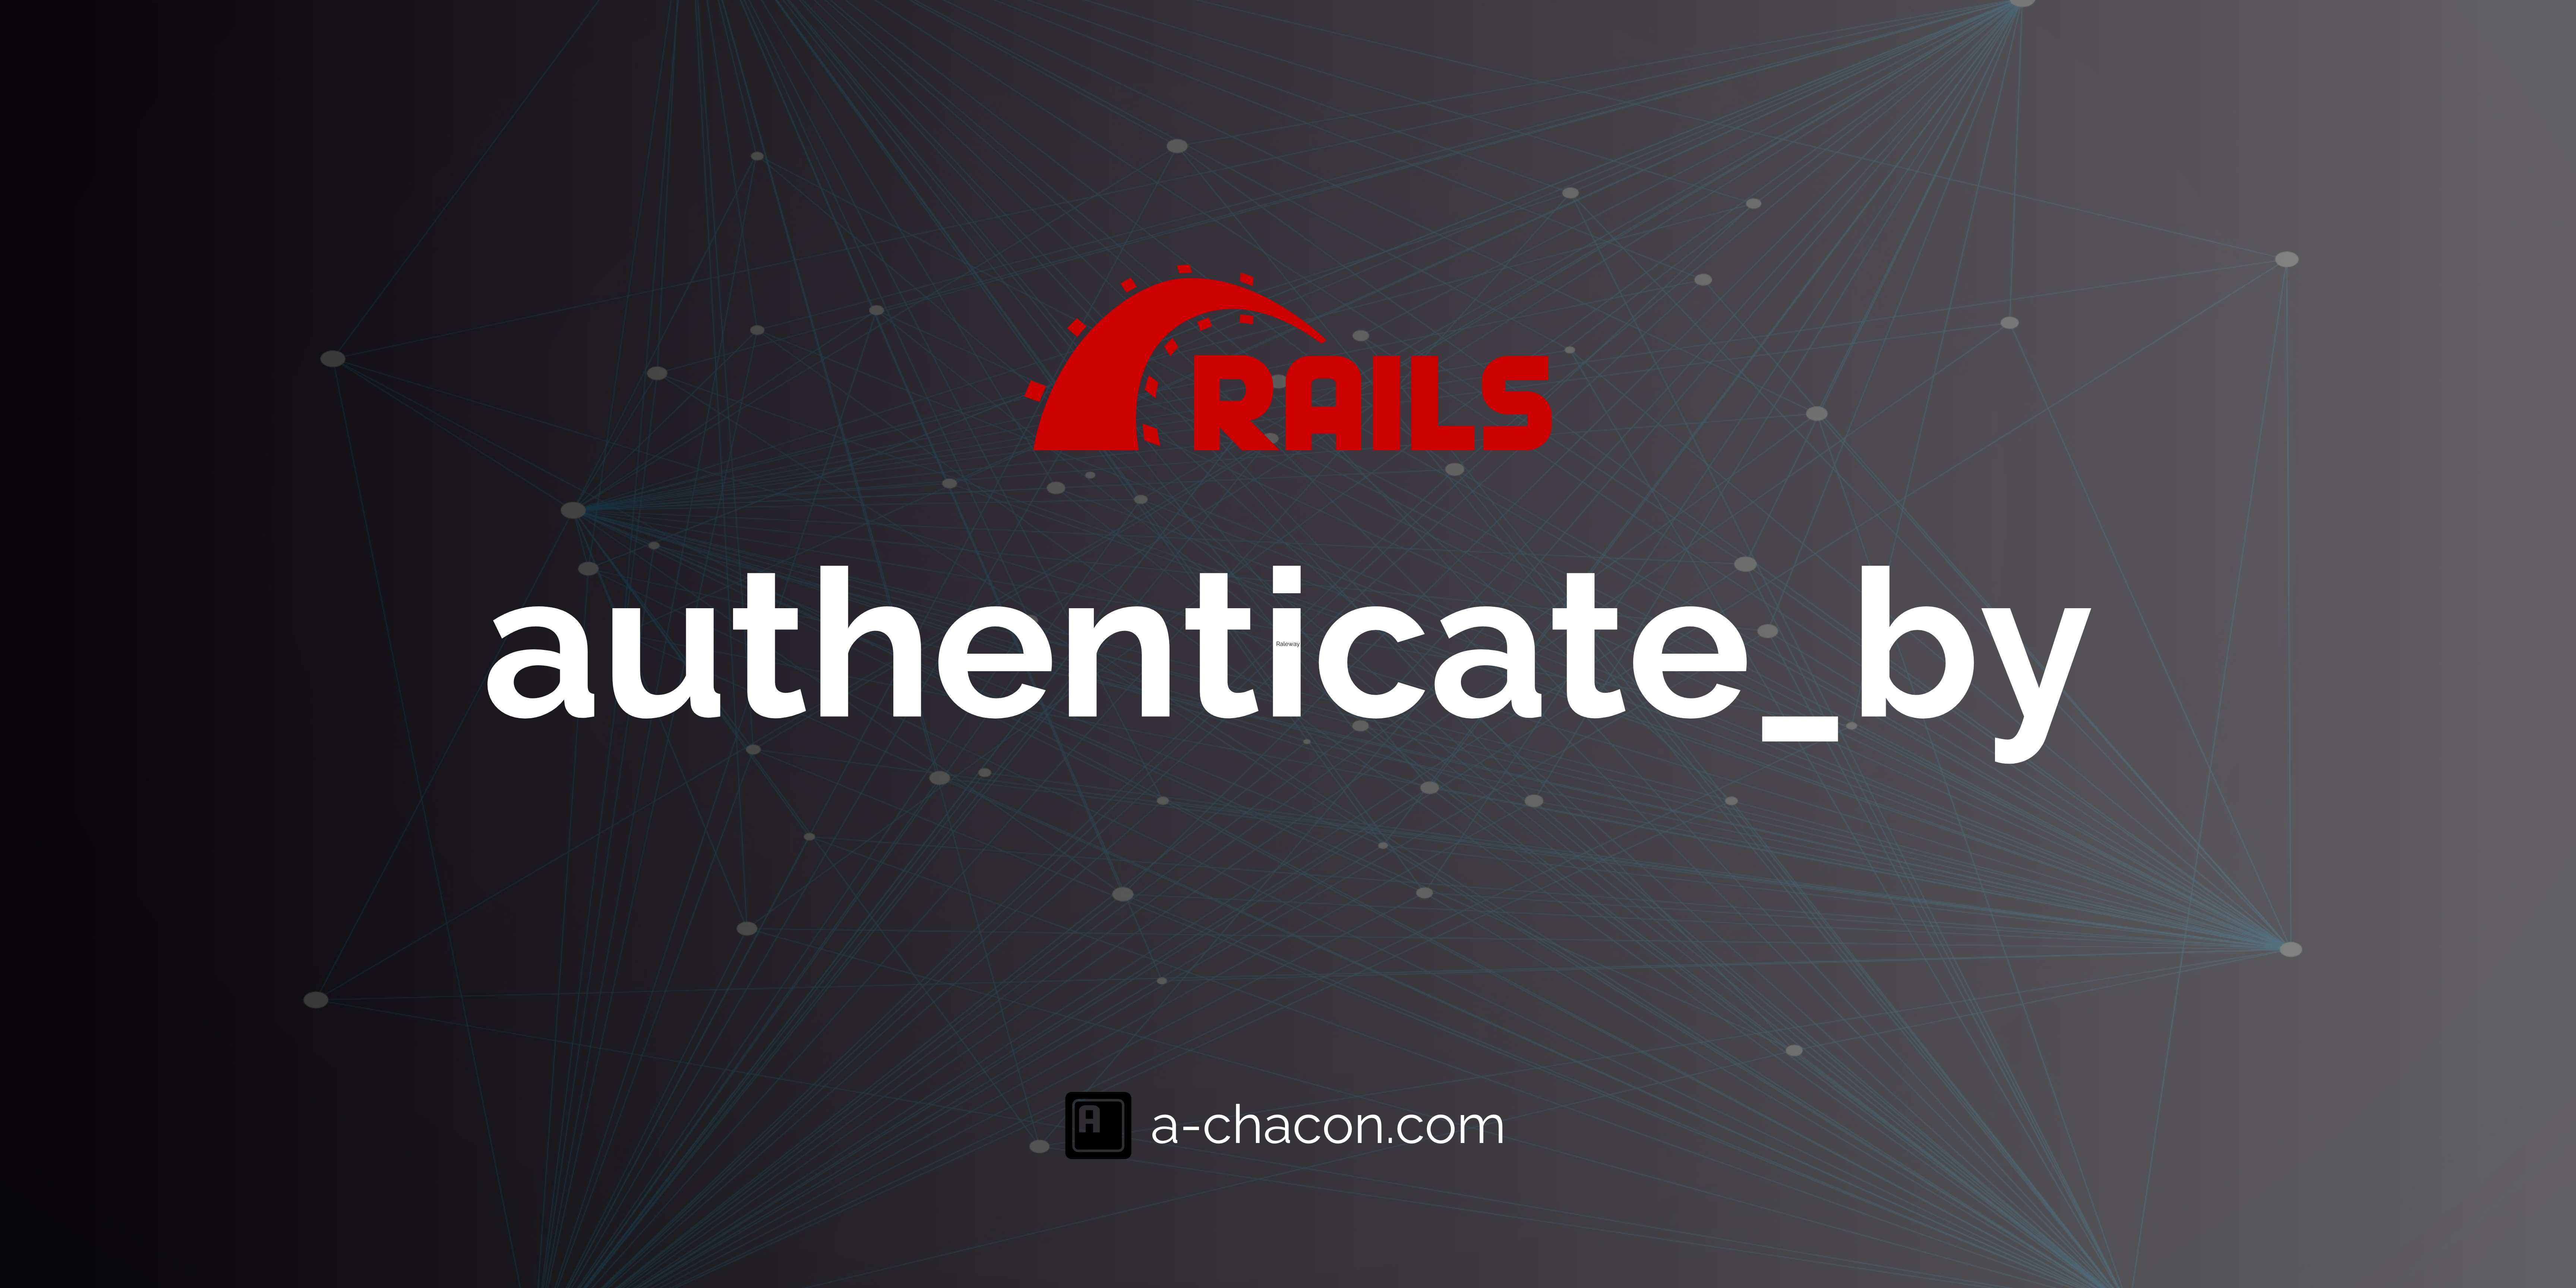 authenticate_by: Prevent timing-based enumeration of users.